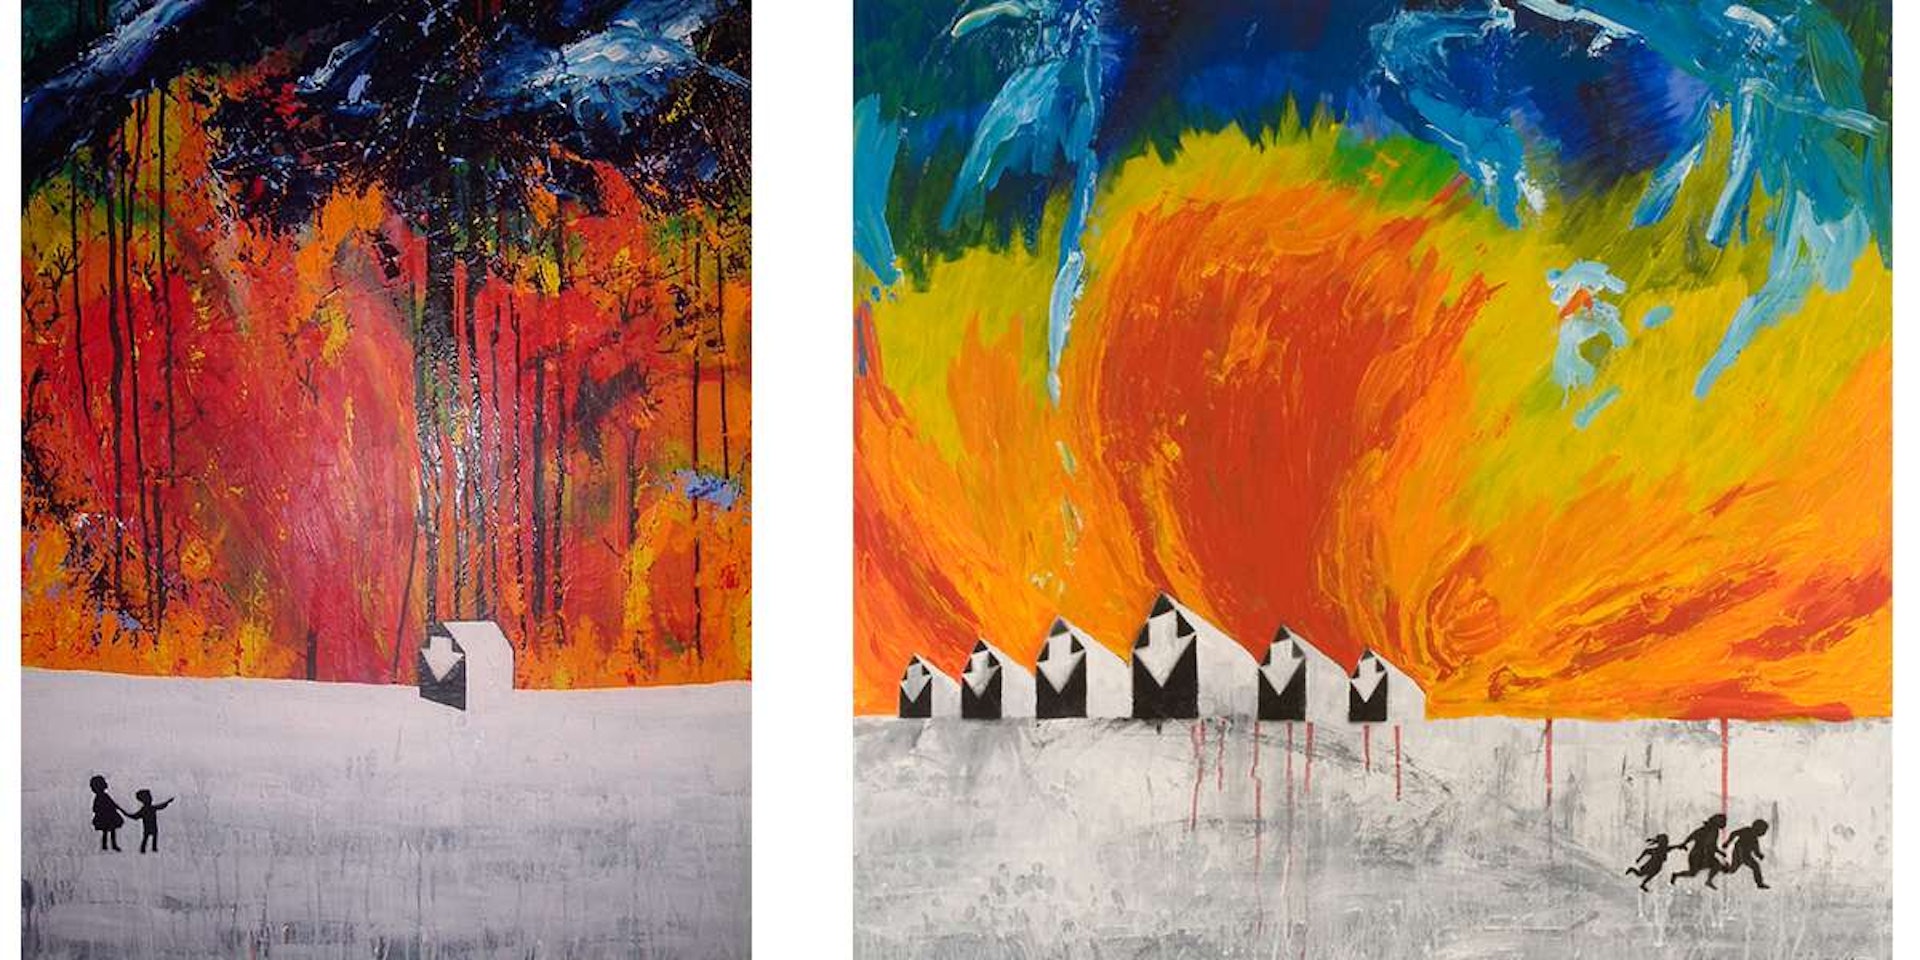 'Faster' by Stanley Donwood